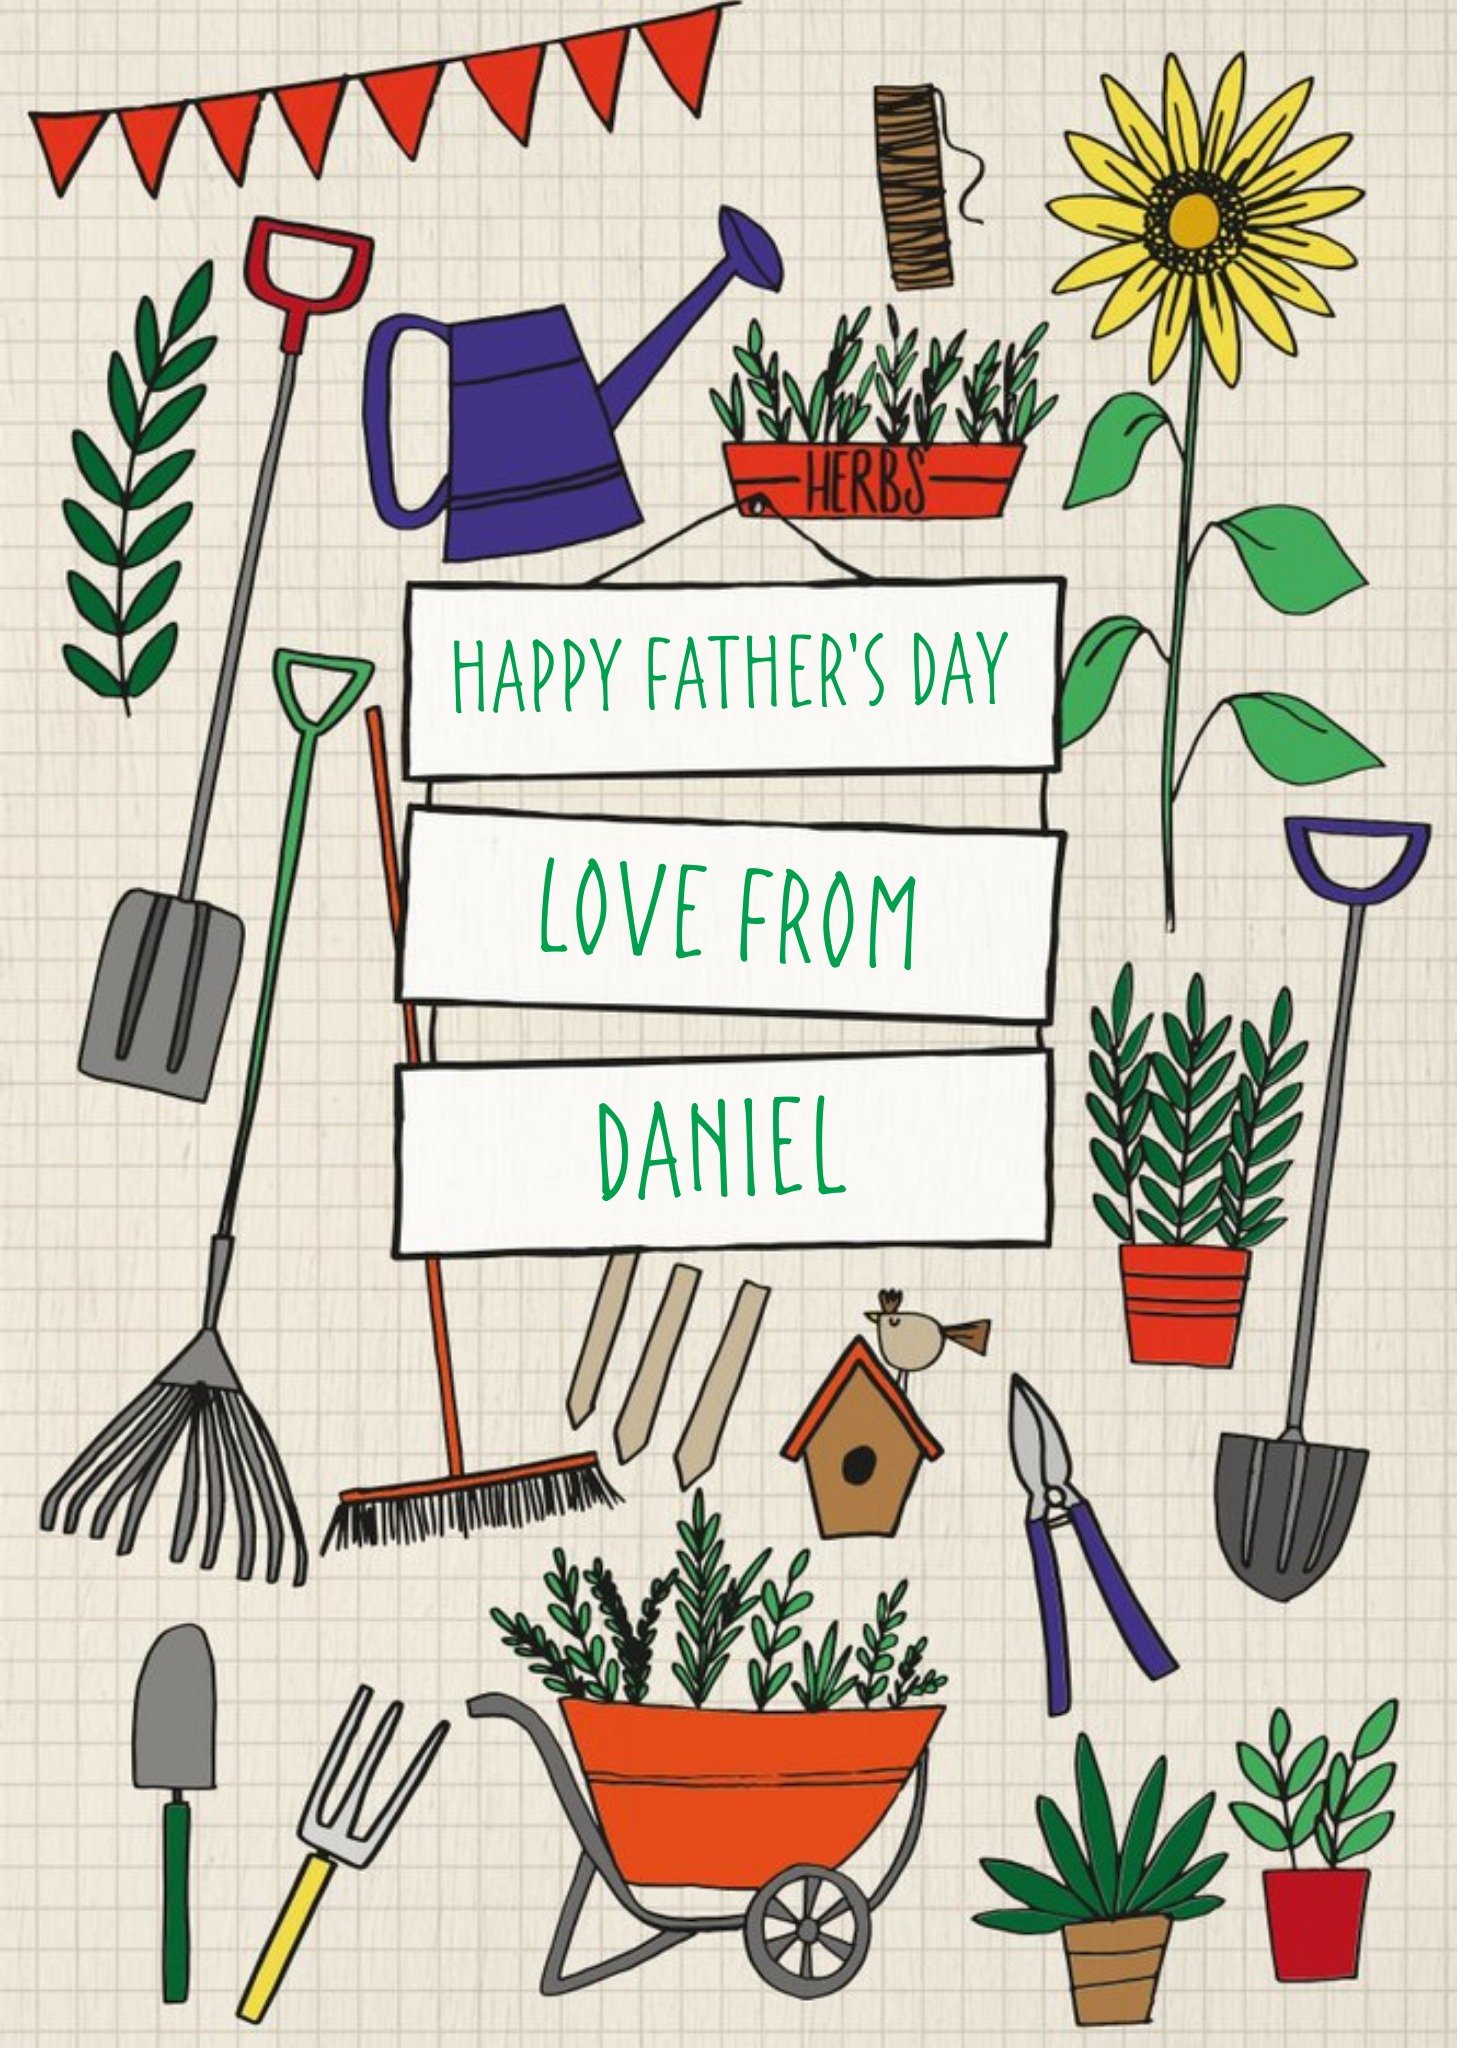 Moonpig Gardening Tools Personalised Fathers Day Card, Large